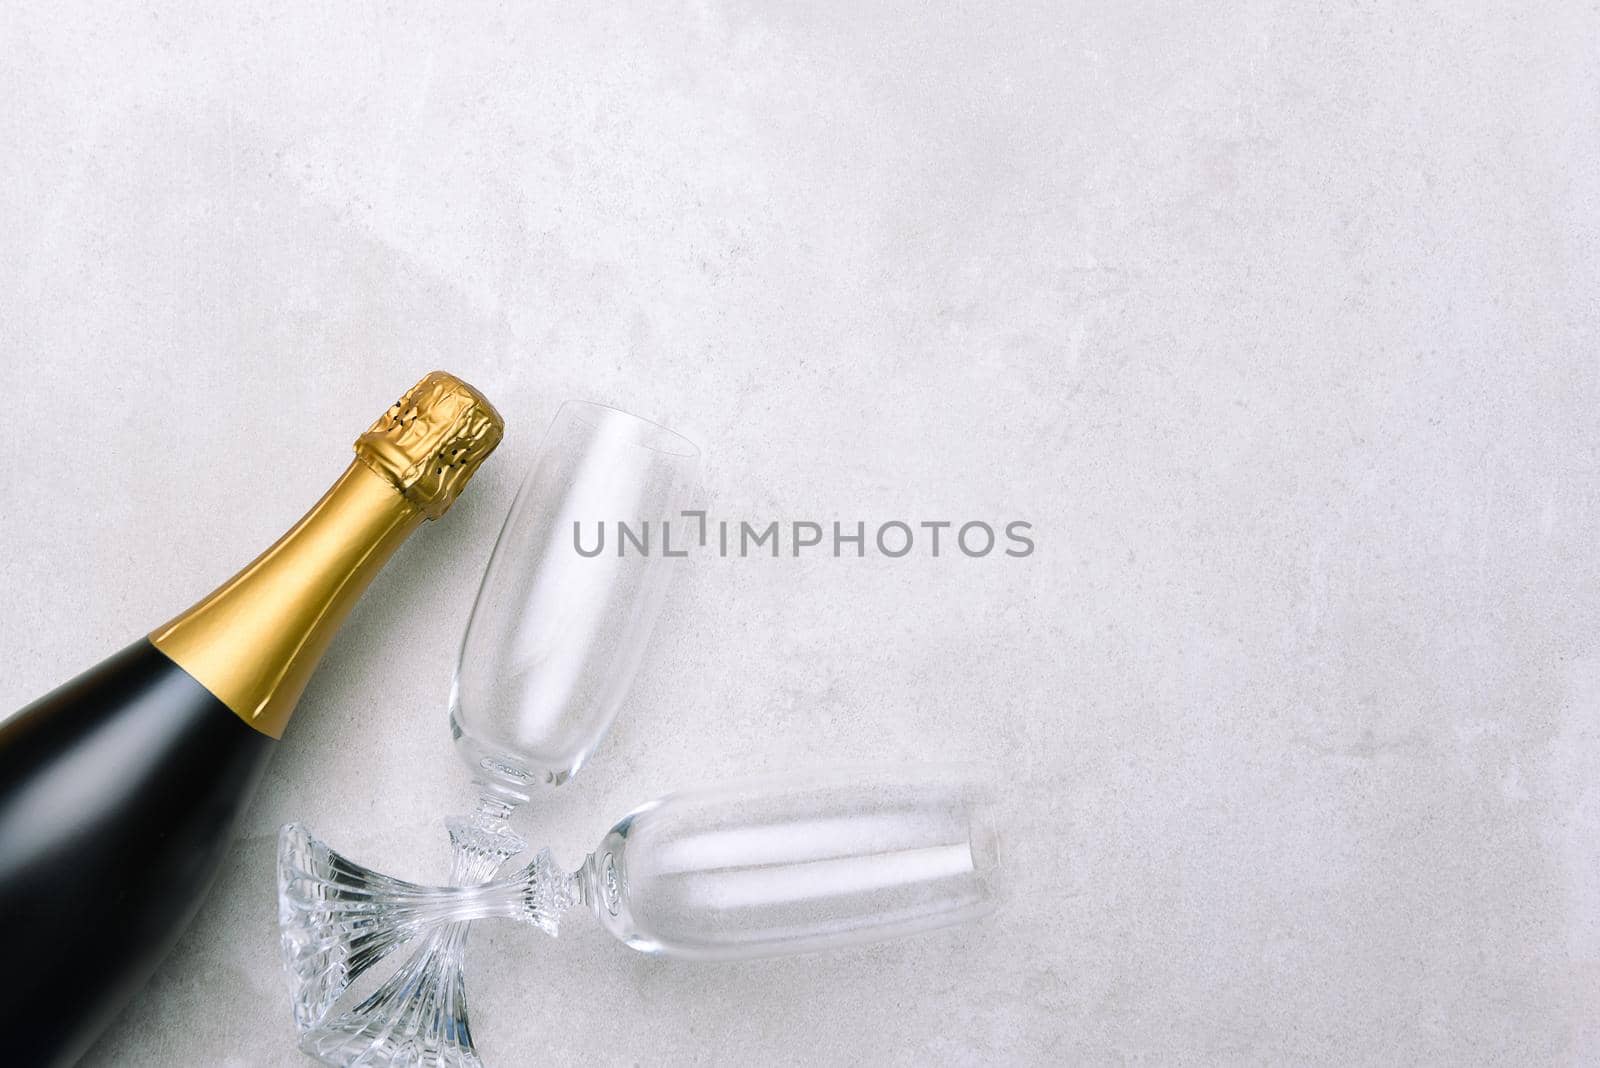 Champagne bottle and glasses on light gray surface. Horizontal format with copy space.